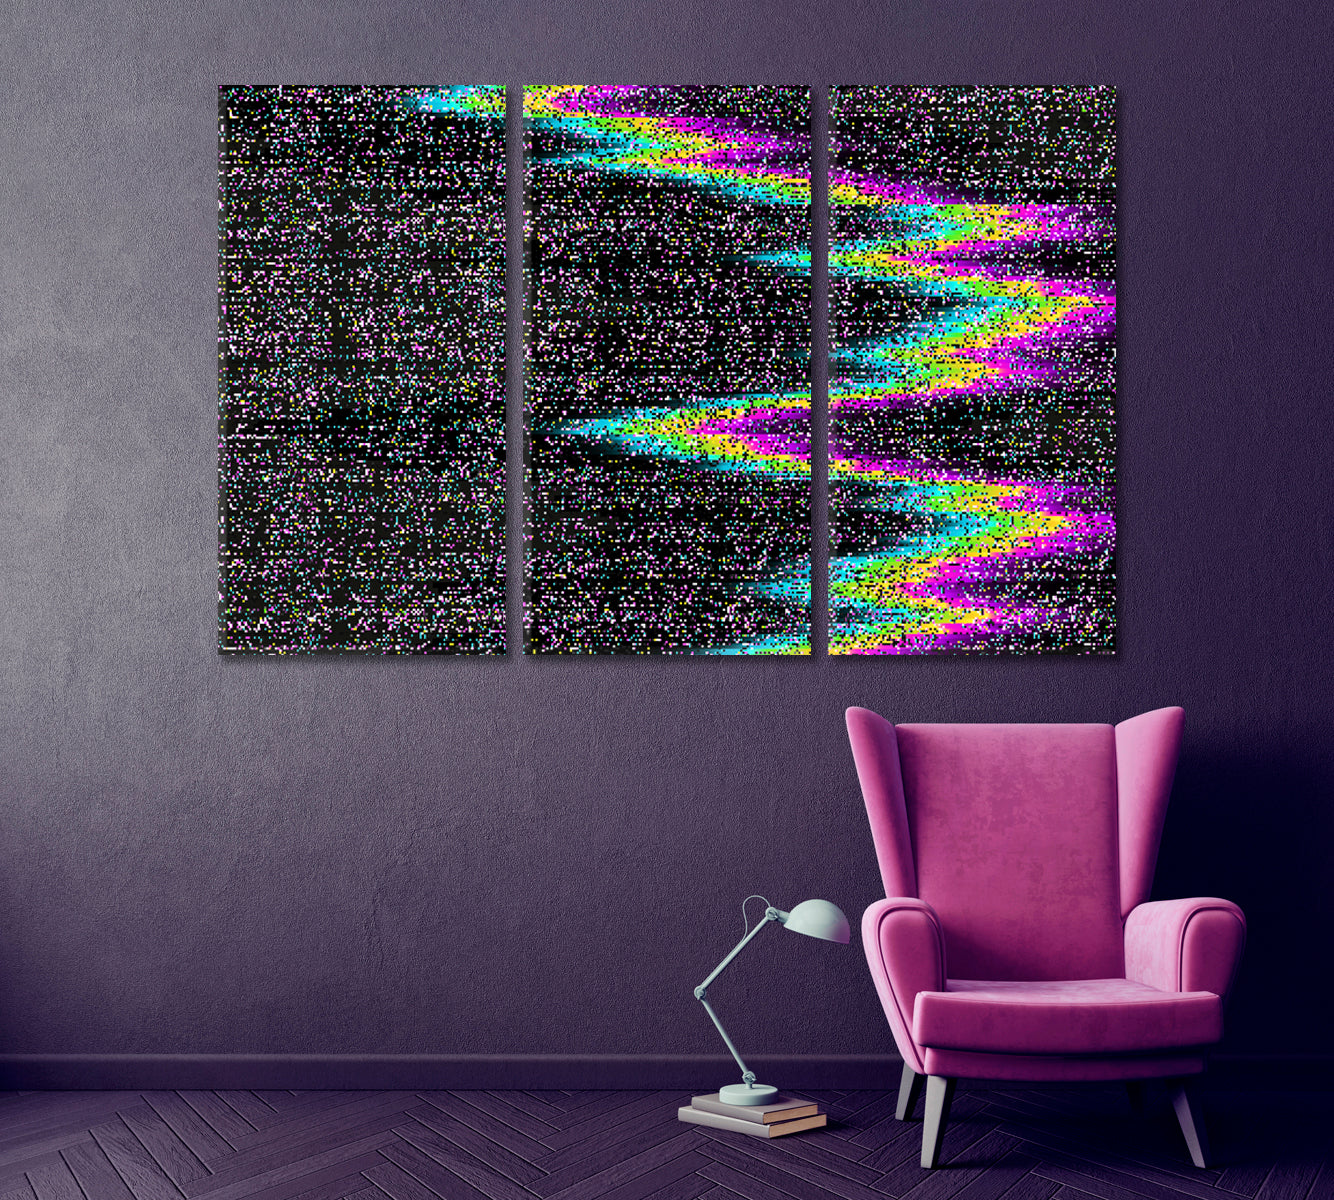 Pixel Noise Abstract Pattern TV Signal Fail Canvas Print ArtLexy 3 Panels 36"x24" inches 